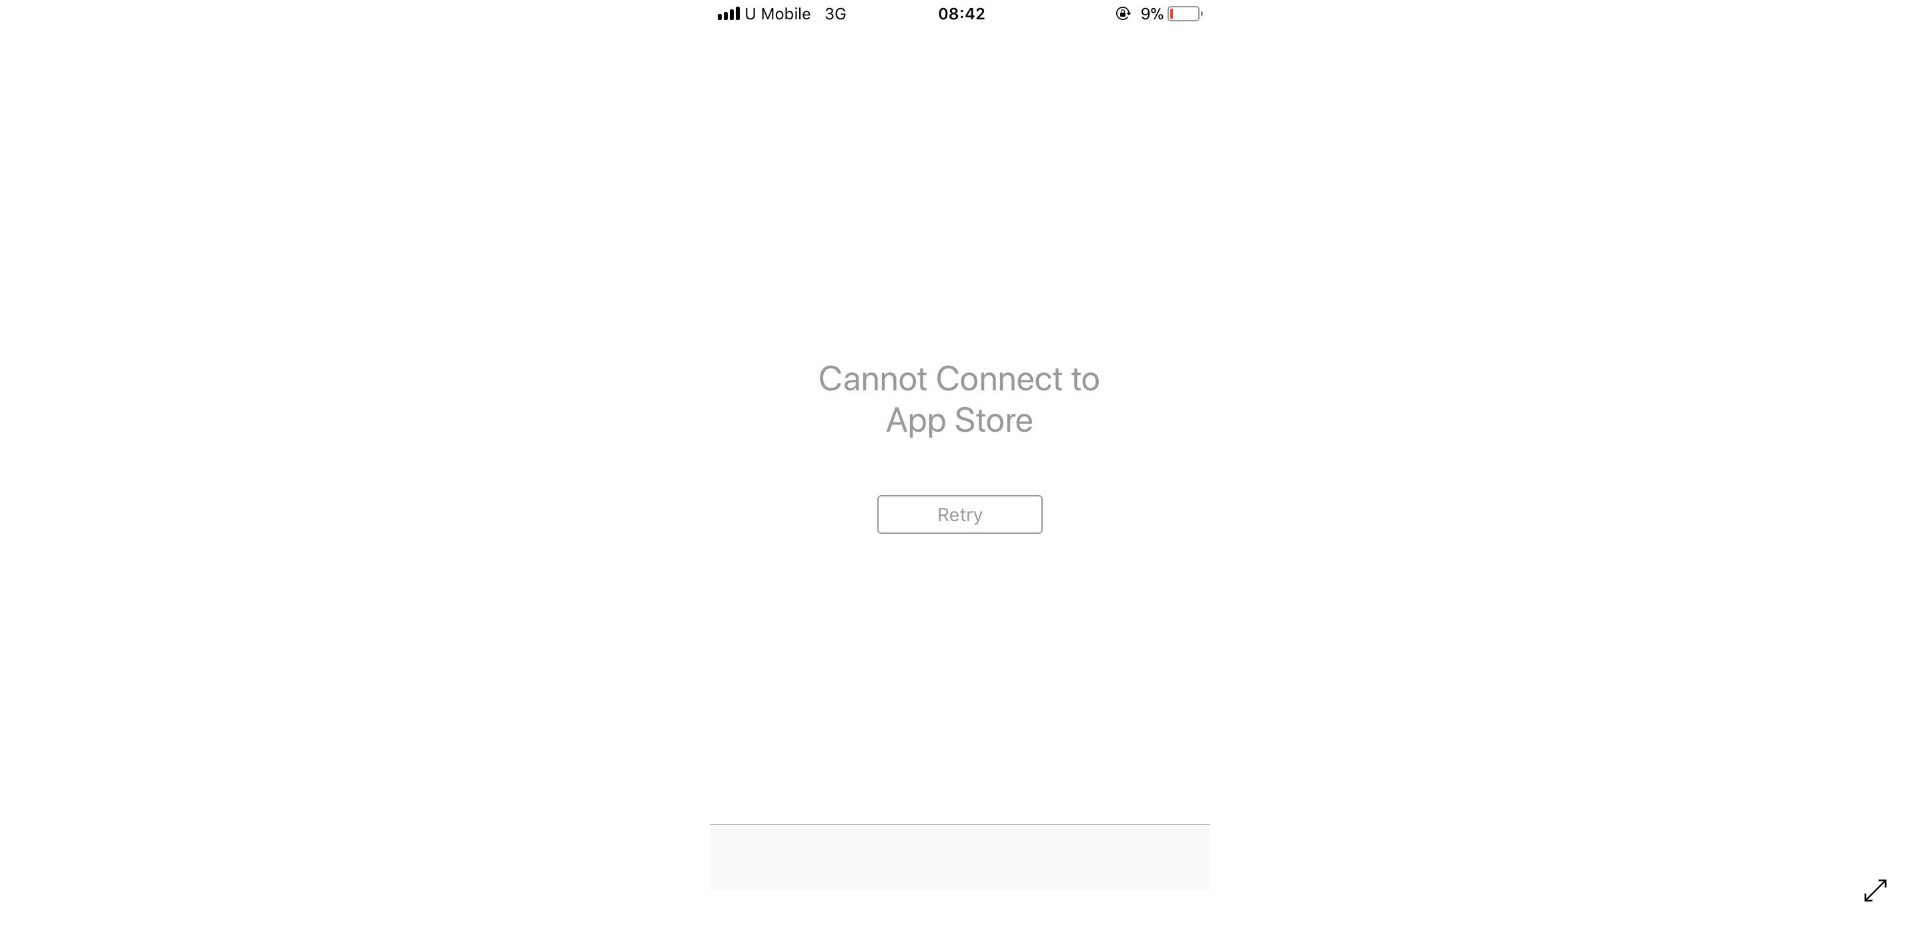 [Update: Apple website down] App Store down and not working? Some users cannot connect to App Store